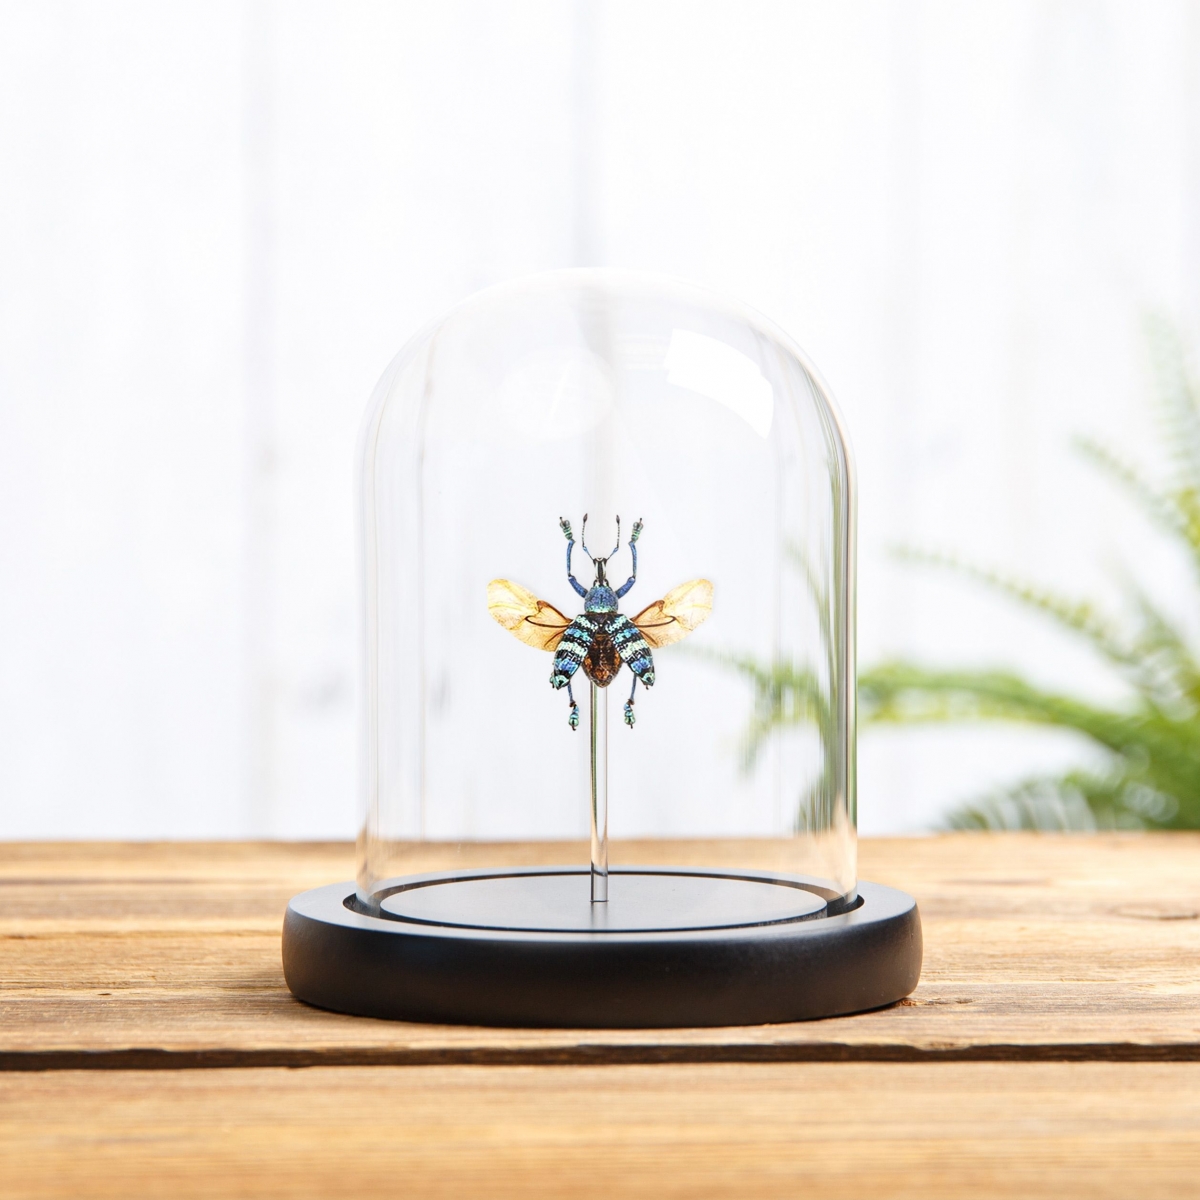 Minibeast Blue Weevil with Wings Spread in Glass Dome with Wooden Base (Eupholus magnificus)